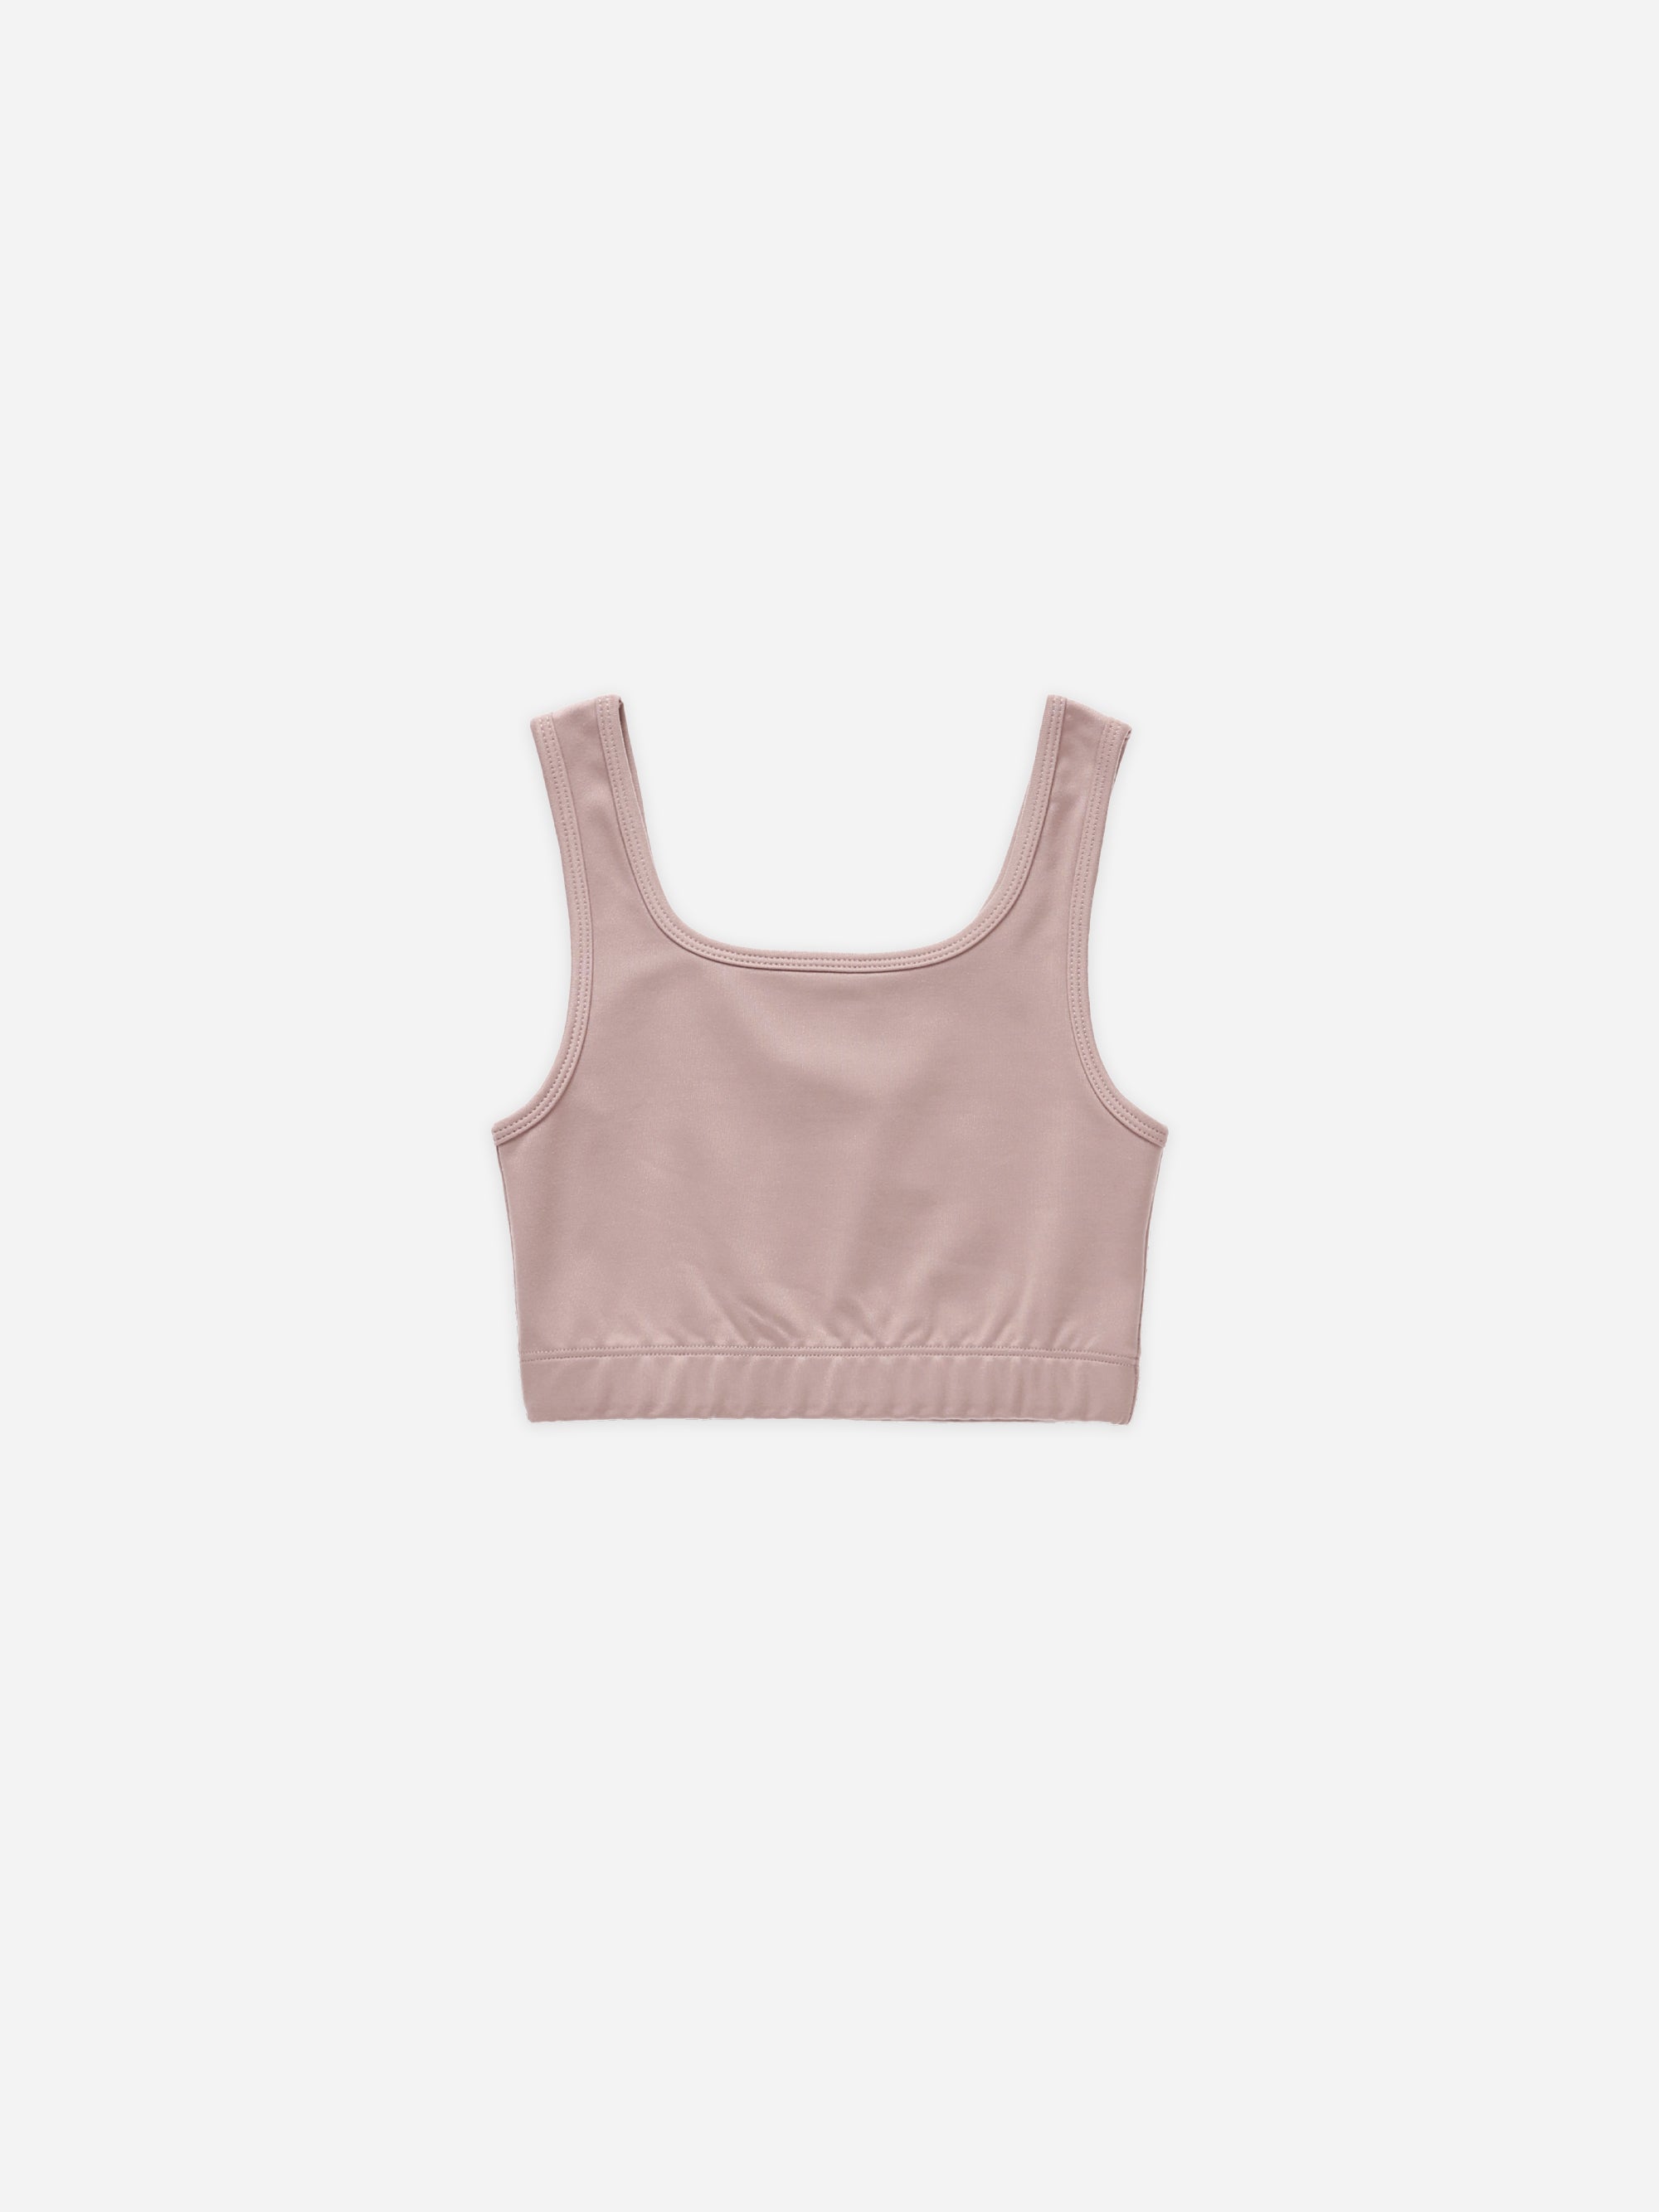 Cropped Fitted Tank || Mauve - Rylee + Cru | Kids Clothes | Trendy Baby Clothes | Modern Infant Outfits |